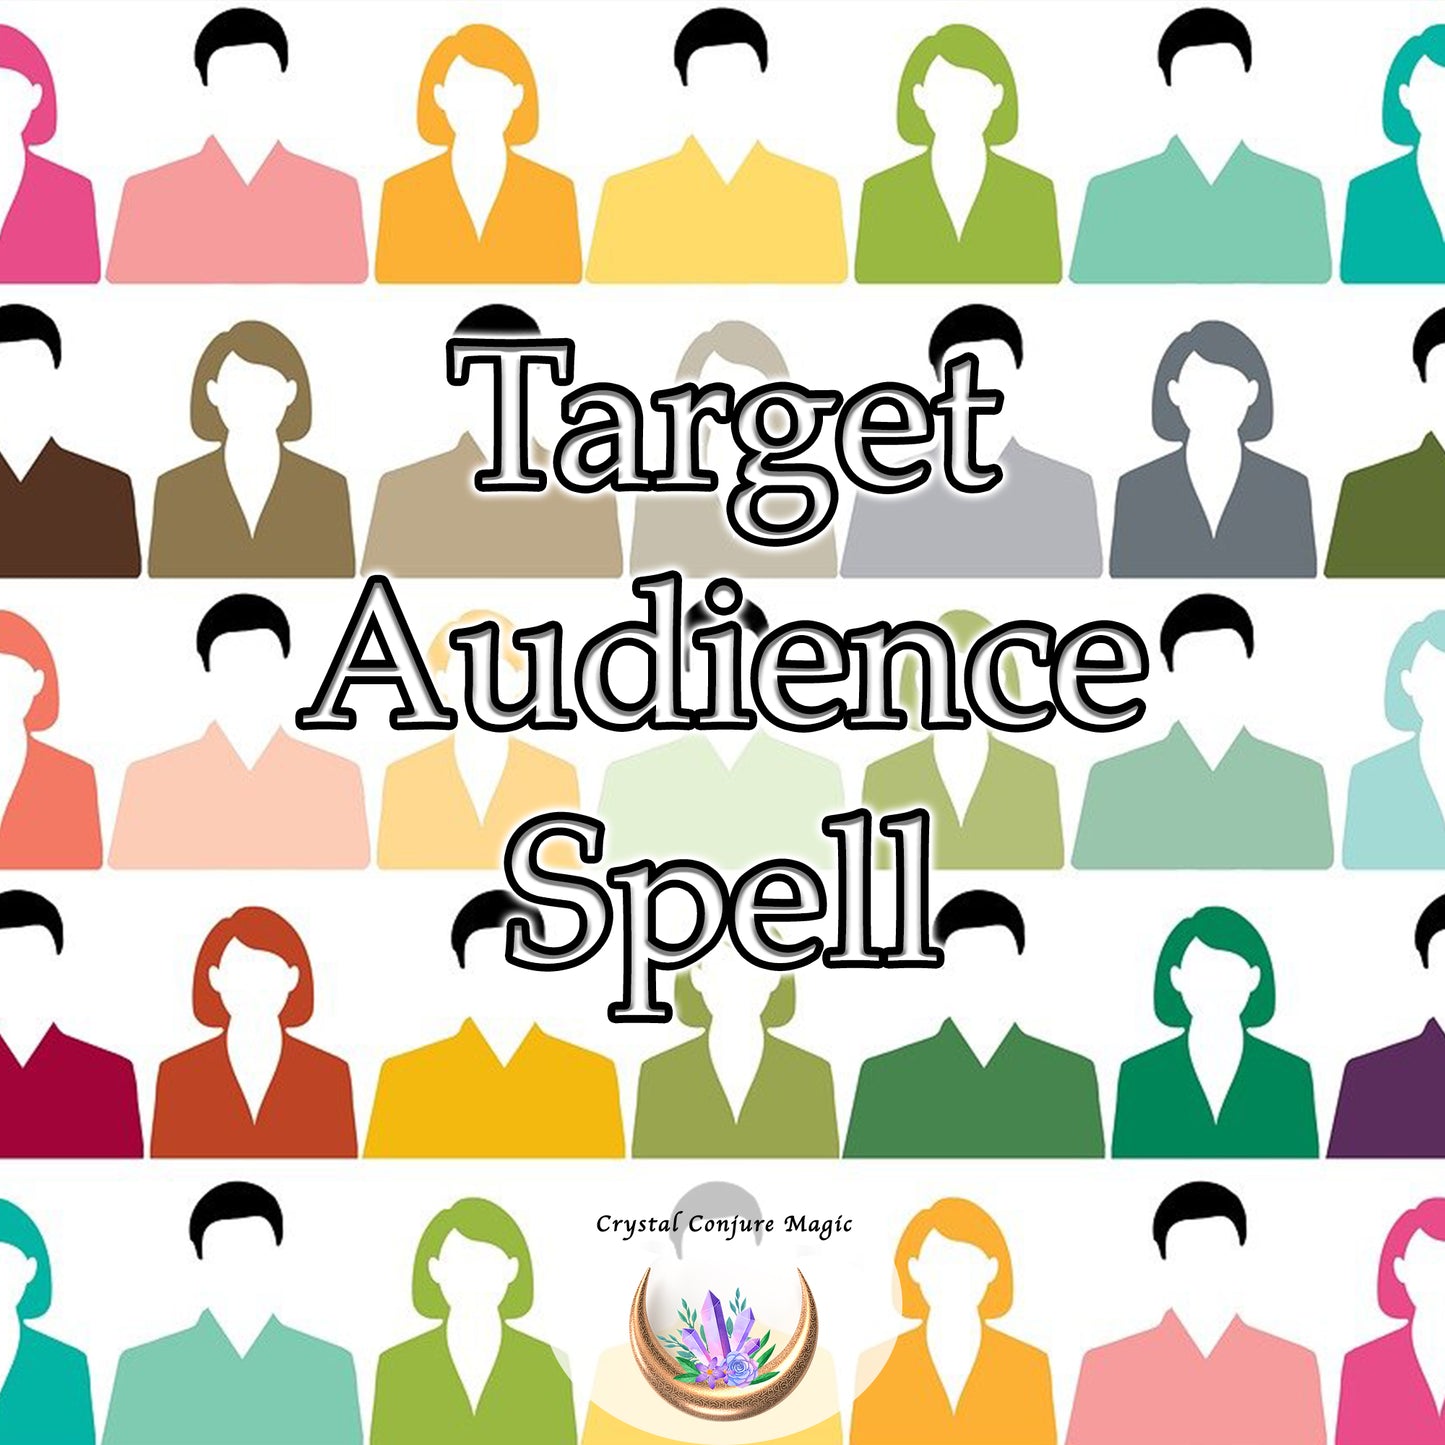 Target Audience Spell - guide your content and marketing efforts straight to your target audience